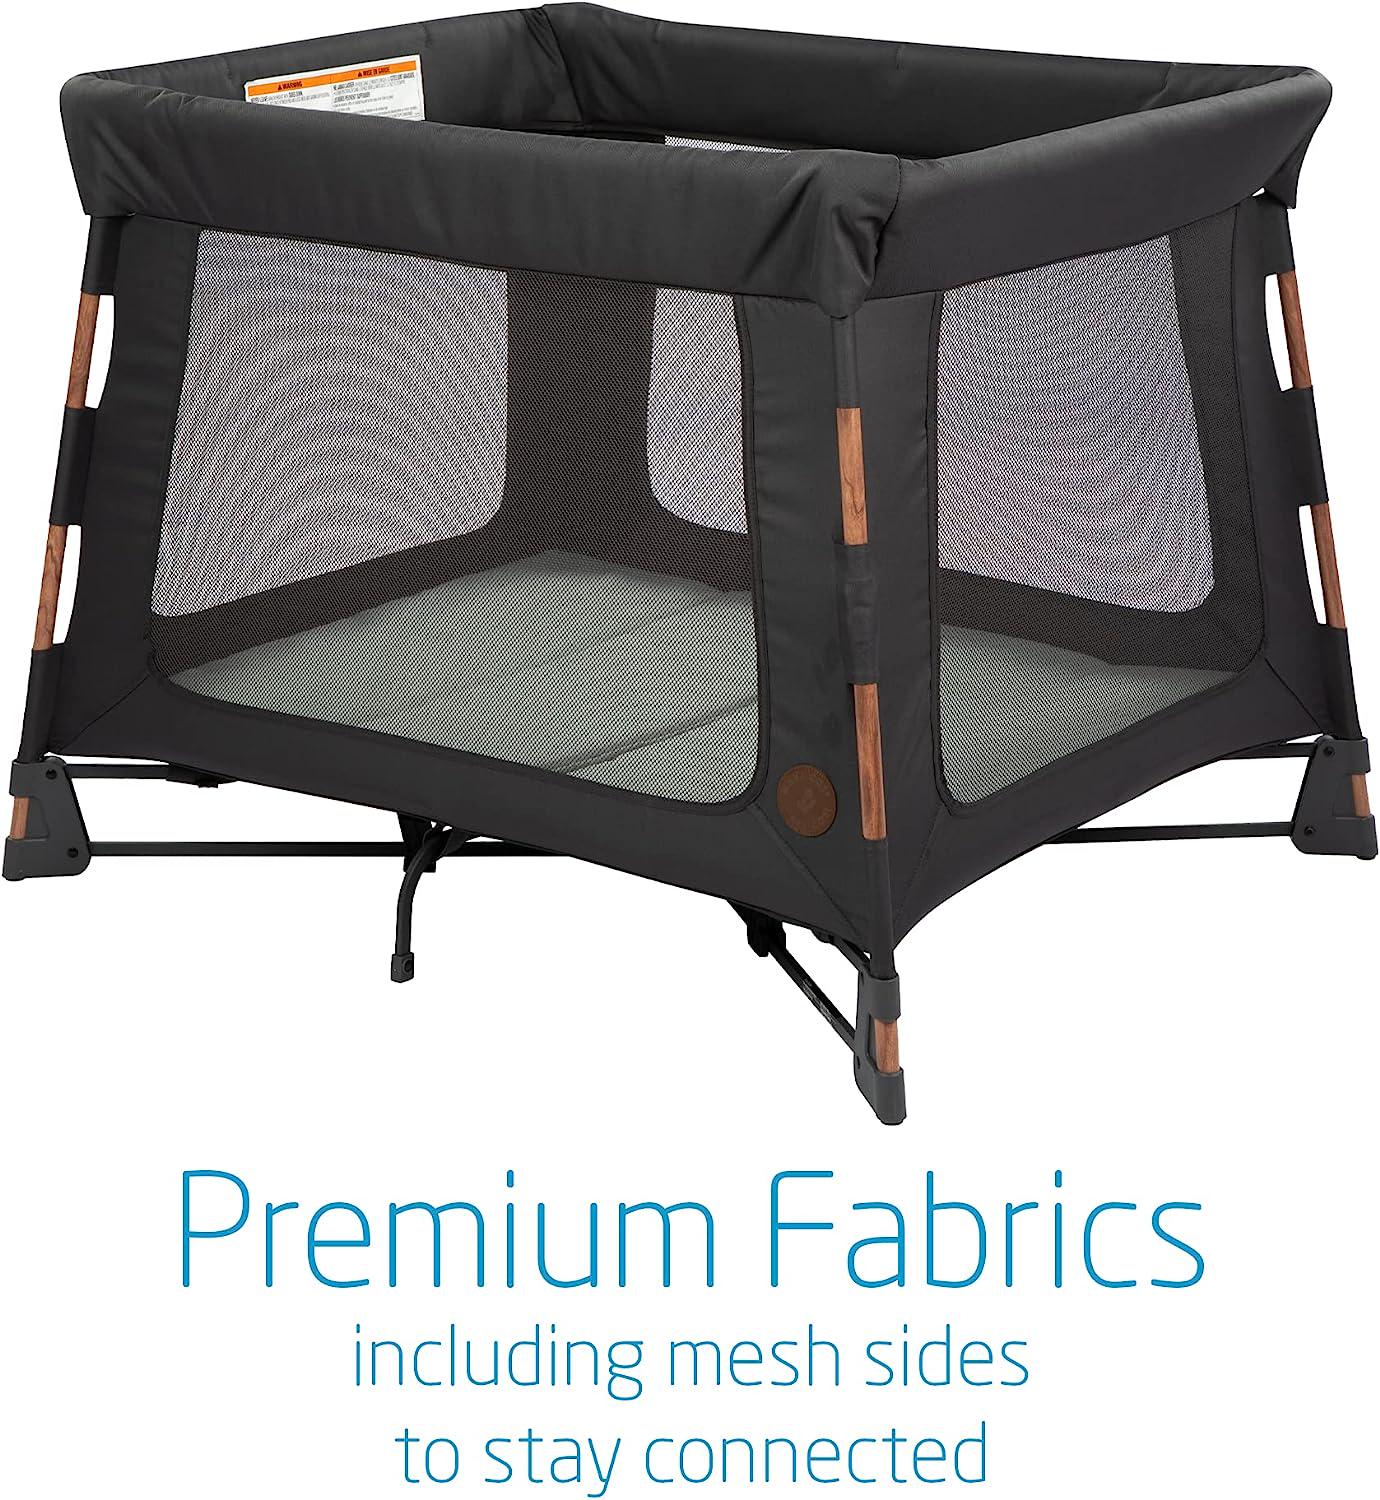 -Swift Lightweight Portable Playard, 1-Step Fold PlaypenWith Travel Bag, 2-Stage Mattress for Newborn to Toddlers, Essential Graphite